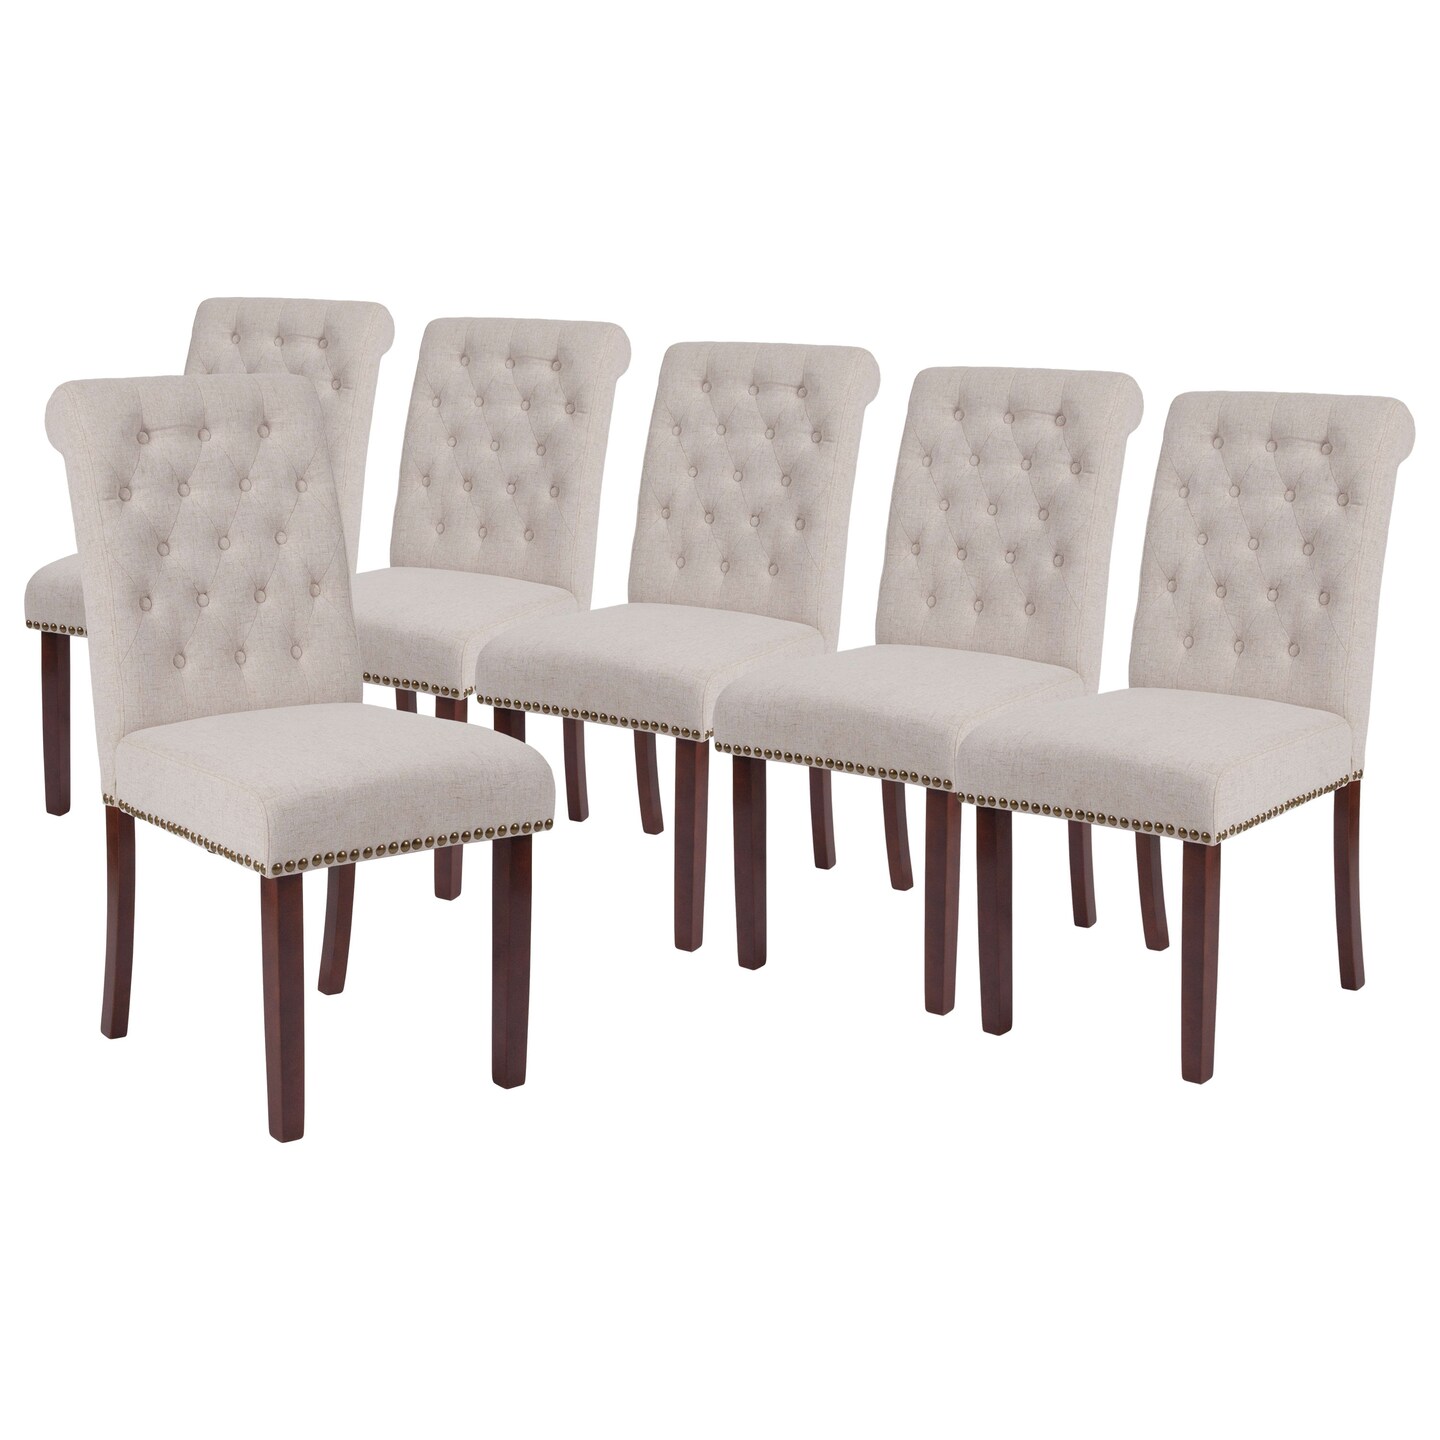 Merrick Lane Falmouth Upholstered Parsons Chair with Nailhead Trim - Set of 6